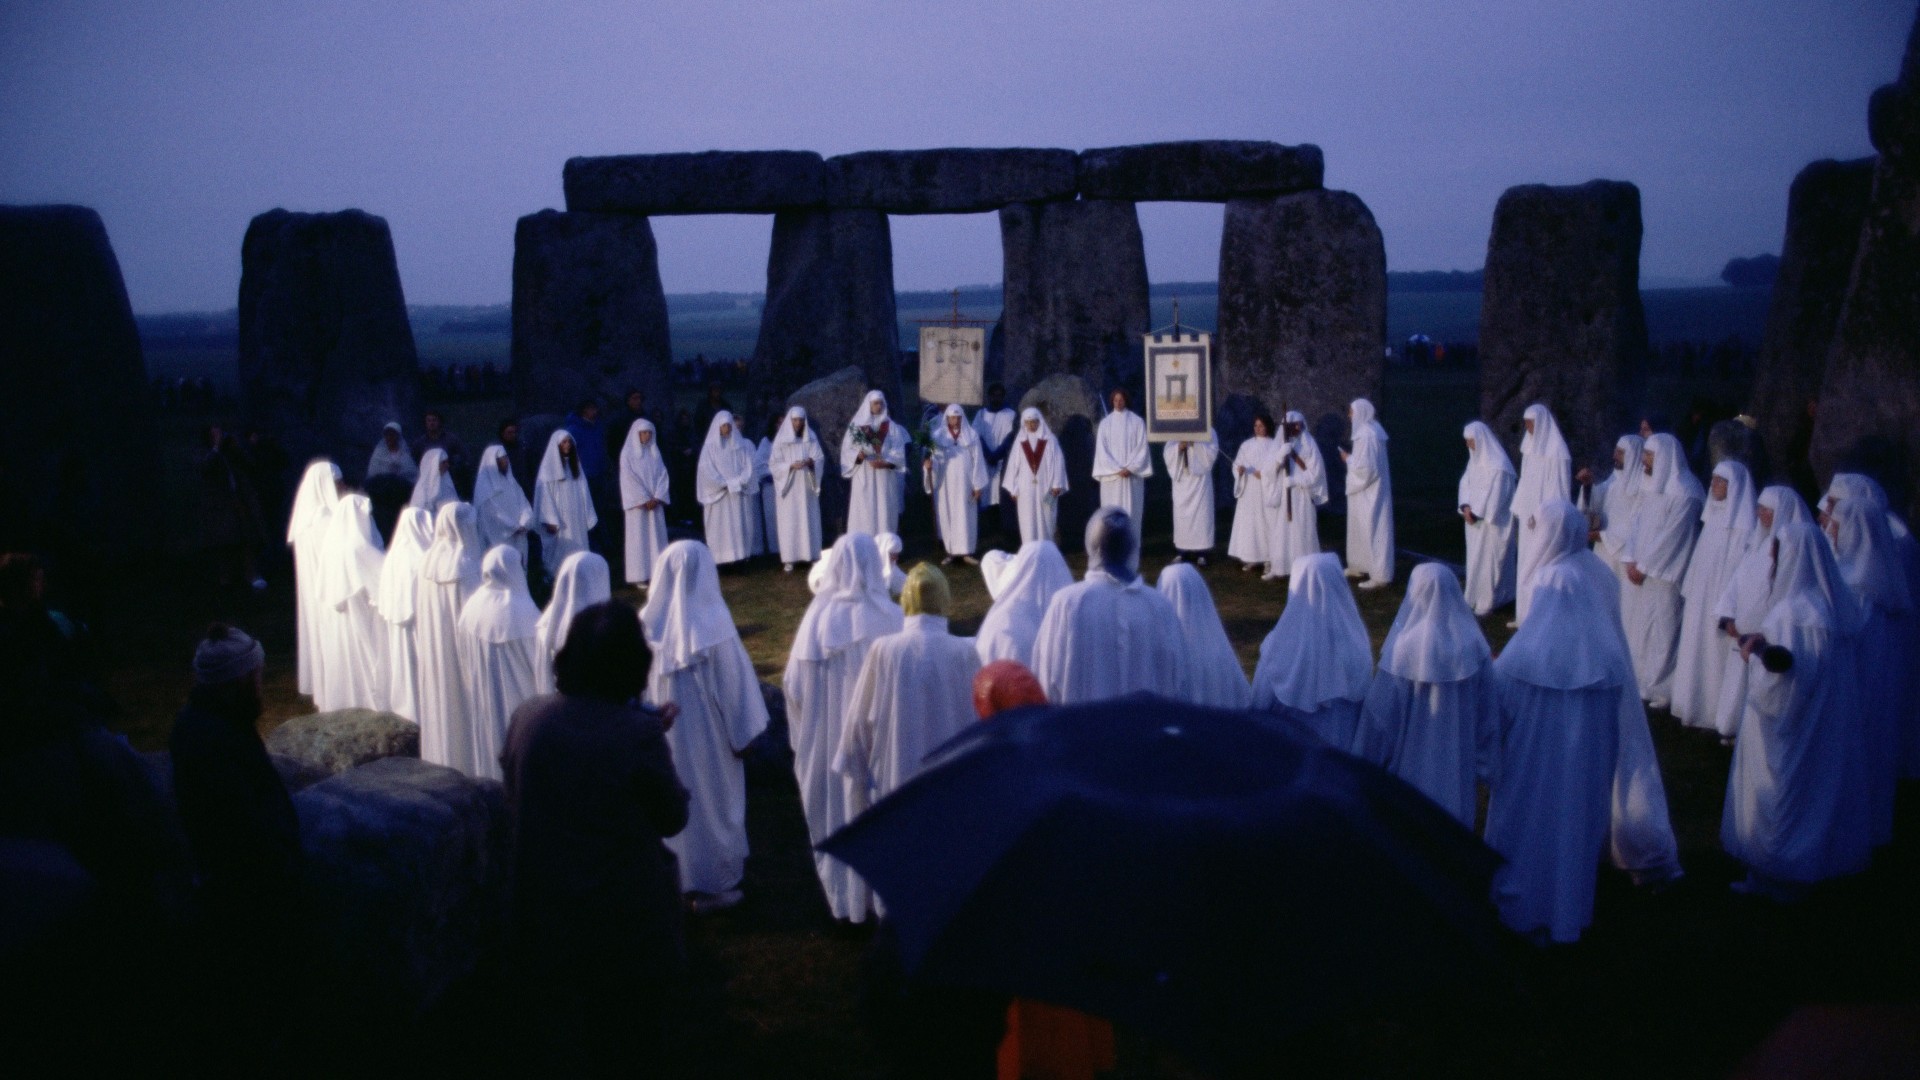 A large crowd of Druids dressed in white robes at a nighttime gathering at Stonehenge in Wiltshire, England